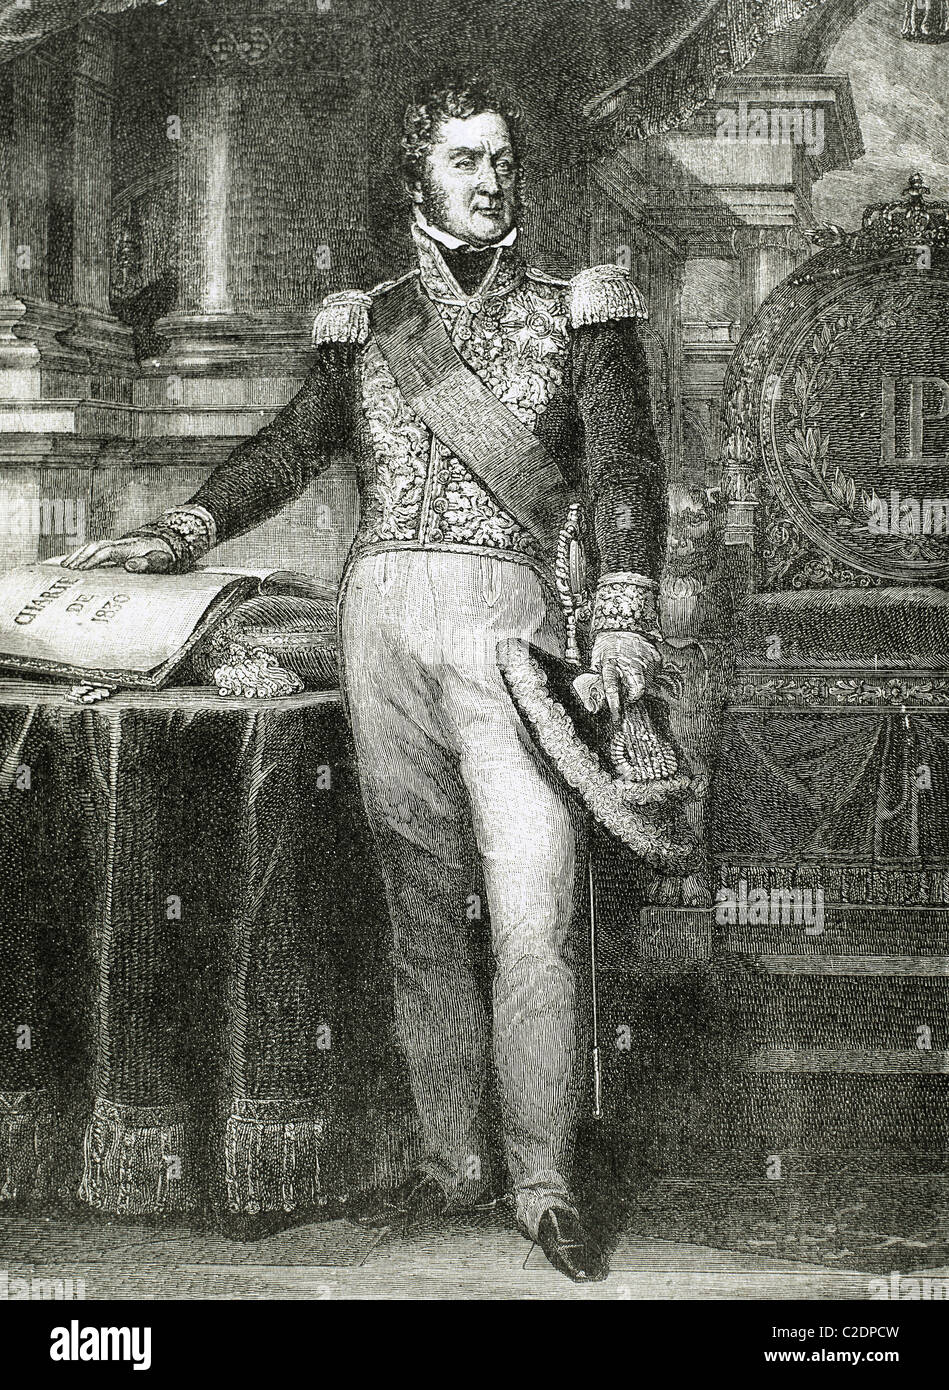 Louis-Philippe I (Paris ,1773-Claremont, 1850). King of France (1830-1848). Engraving. Stock Photo